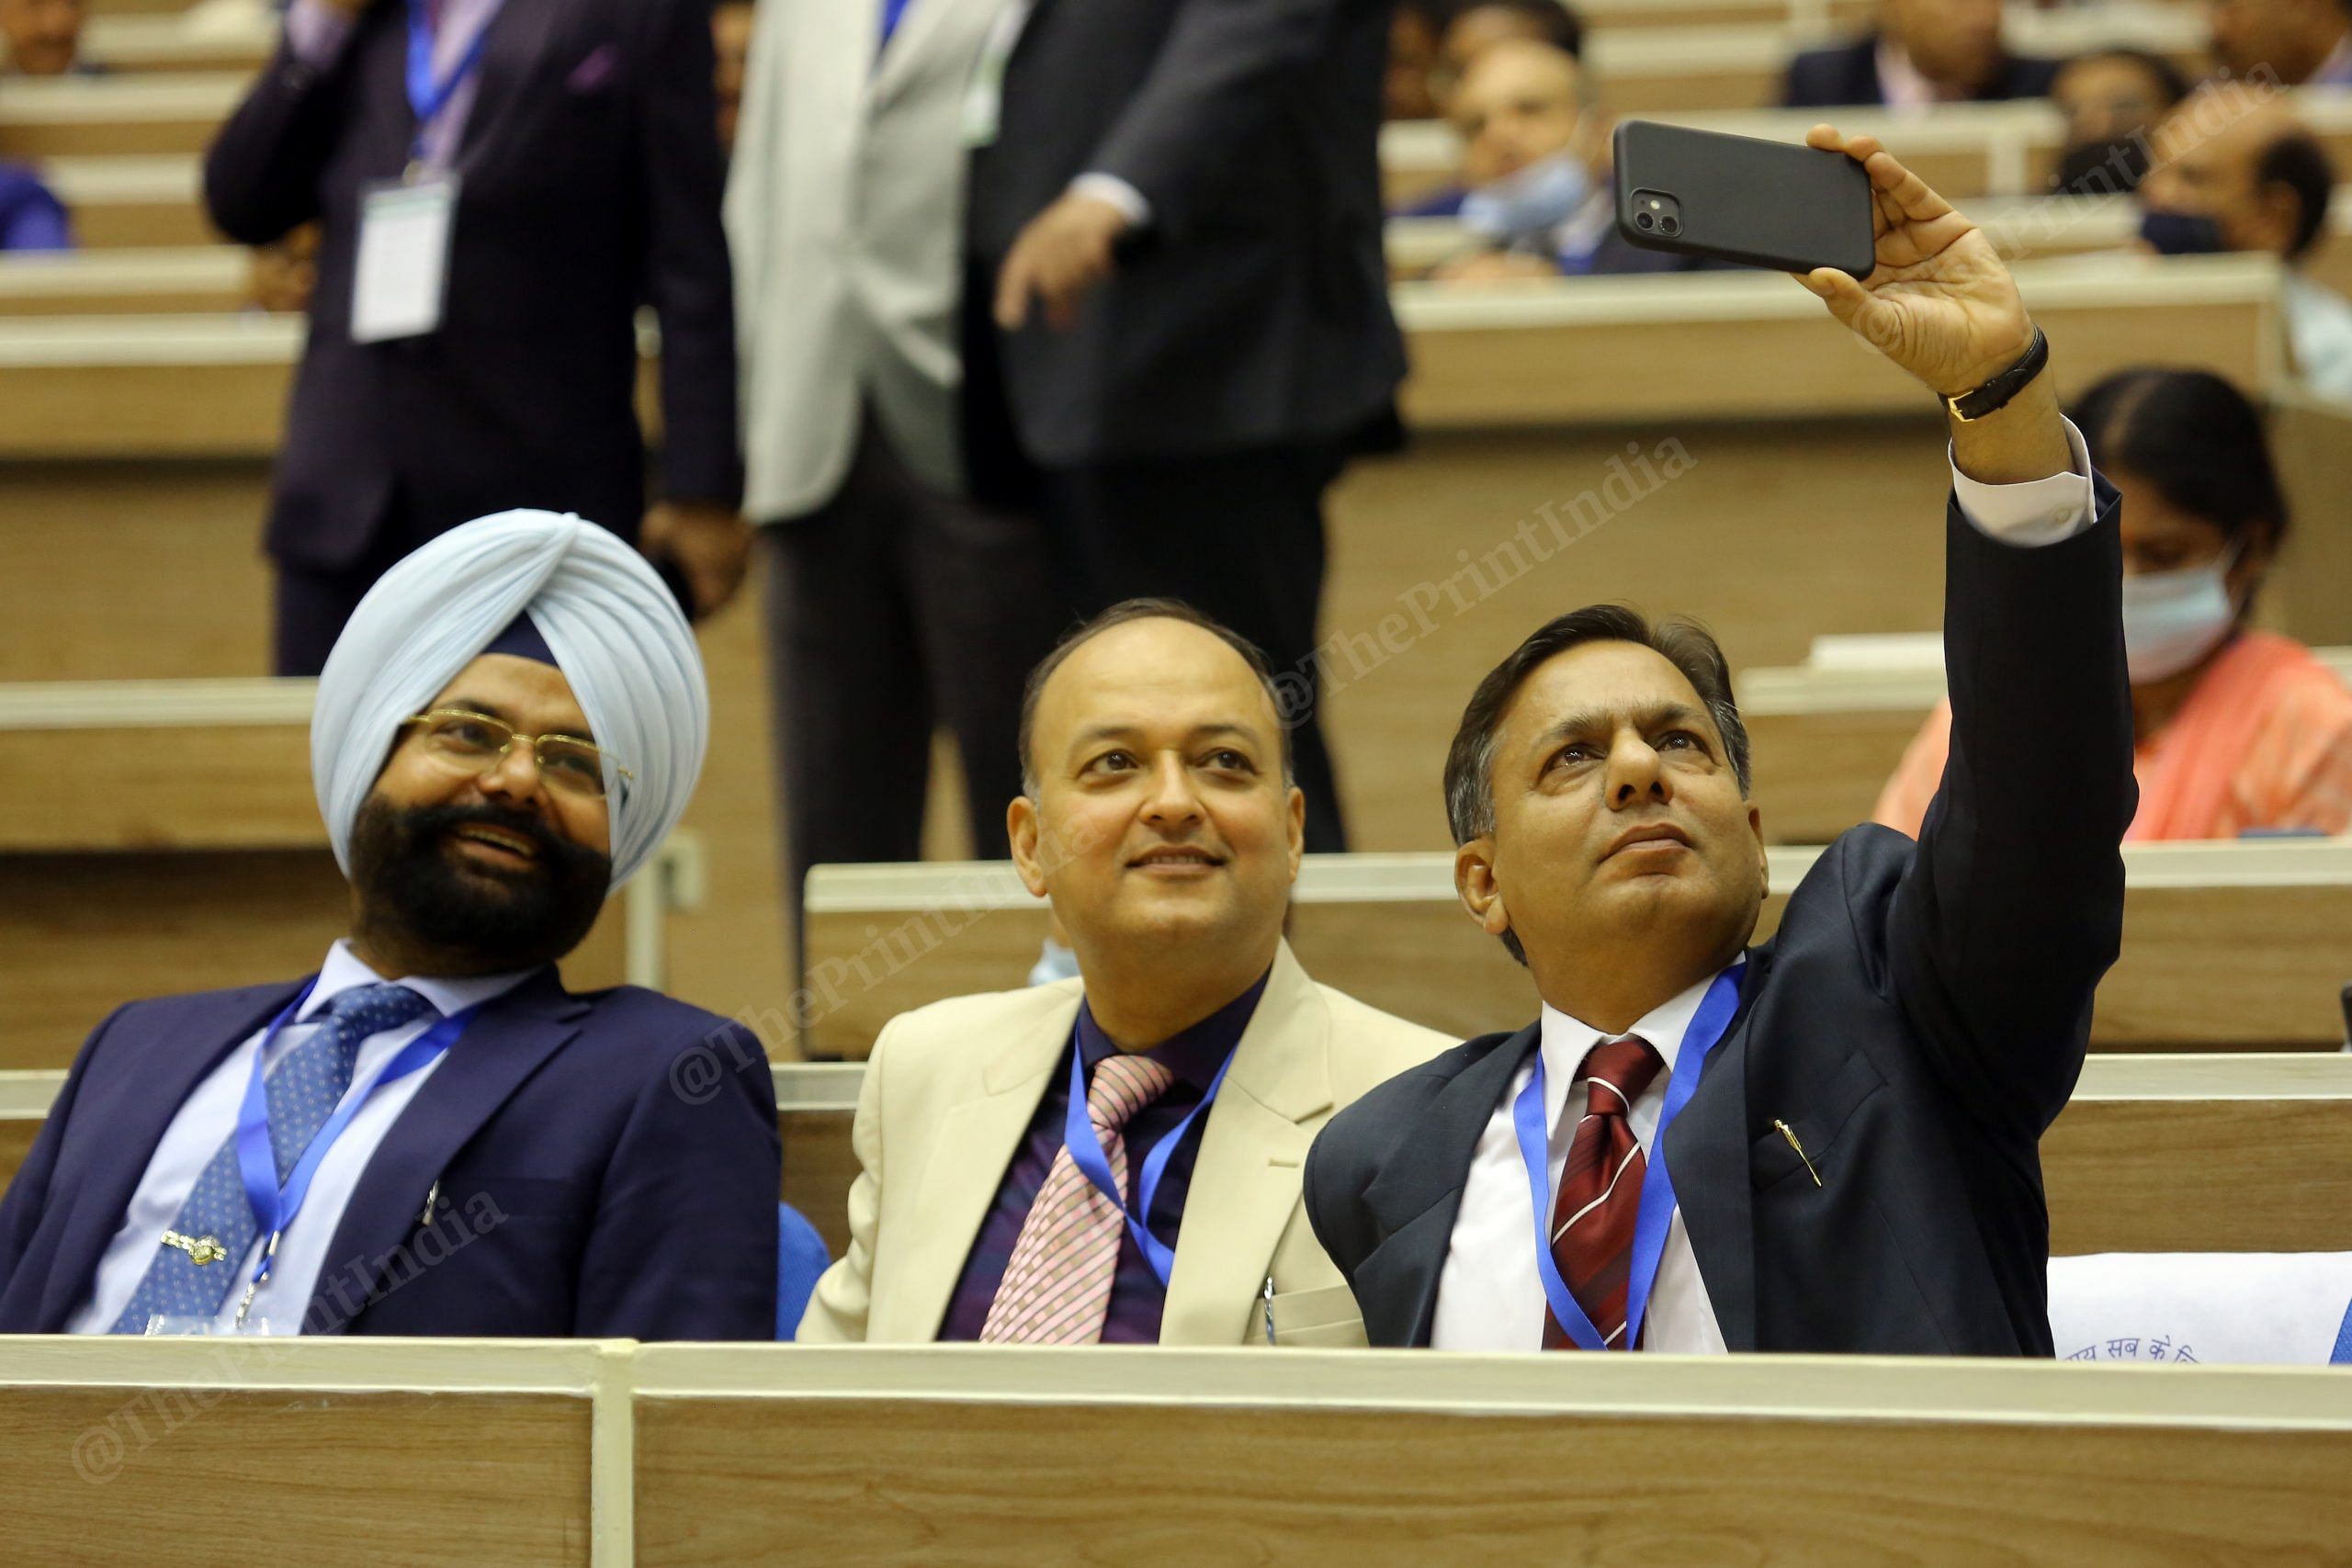 Judges taking selfies during the inaugural session of First All India District Legal Services Authorities Meet, at Vigyan Bhawan in New Delhi | Praveen Jain | ThePrint